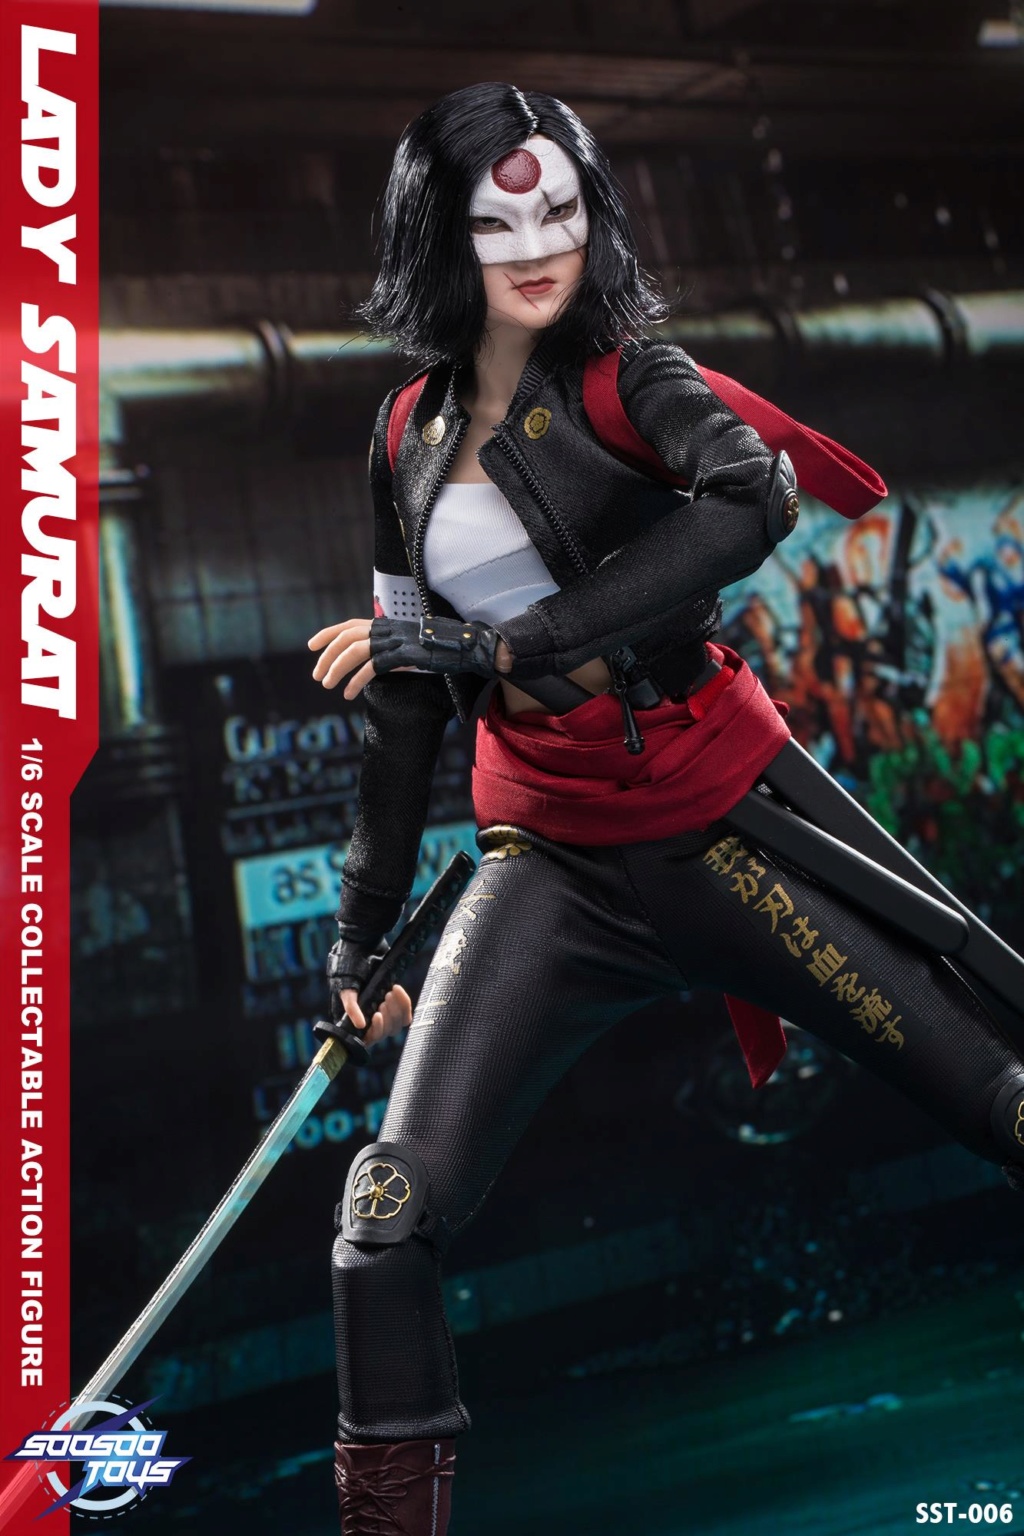 Movie - NEW PRODUCT: Soosootoys 1/6 scale collectible SST-006 Lady Samurai 5150